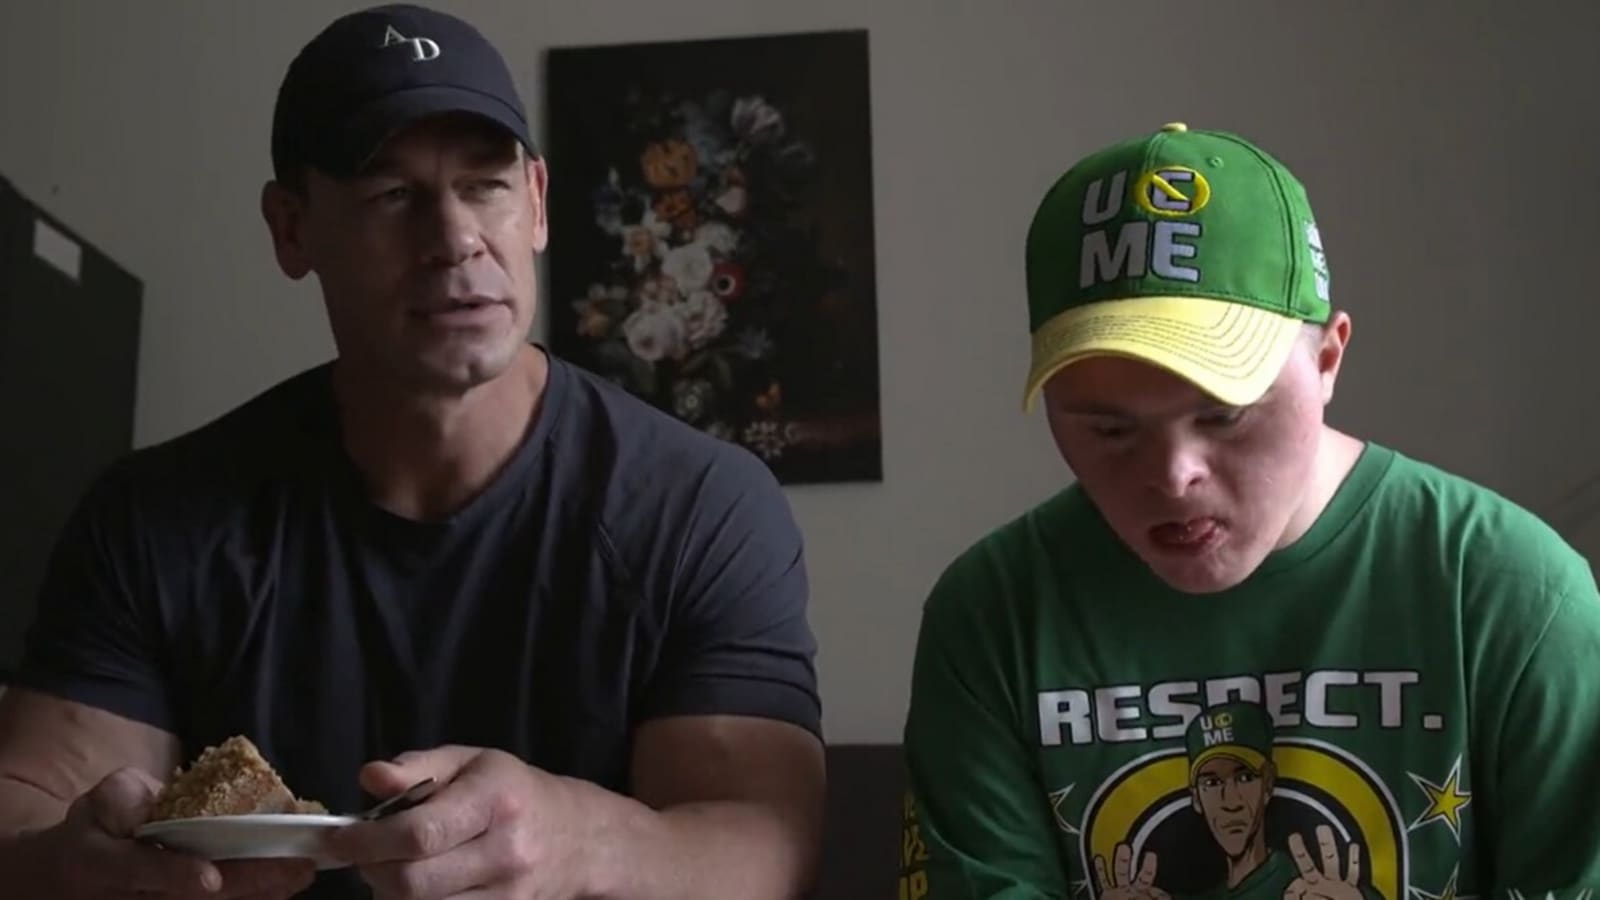 John Cena meets 19-year-old fan with Down Syndrome who fled Ukraine with mom, fans say ‘this bought tears to my eyes’